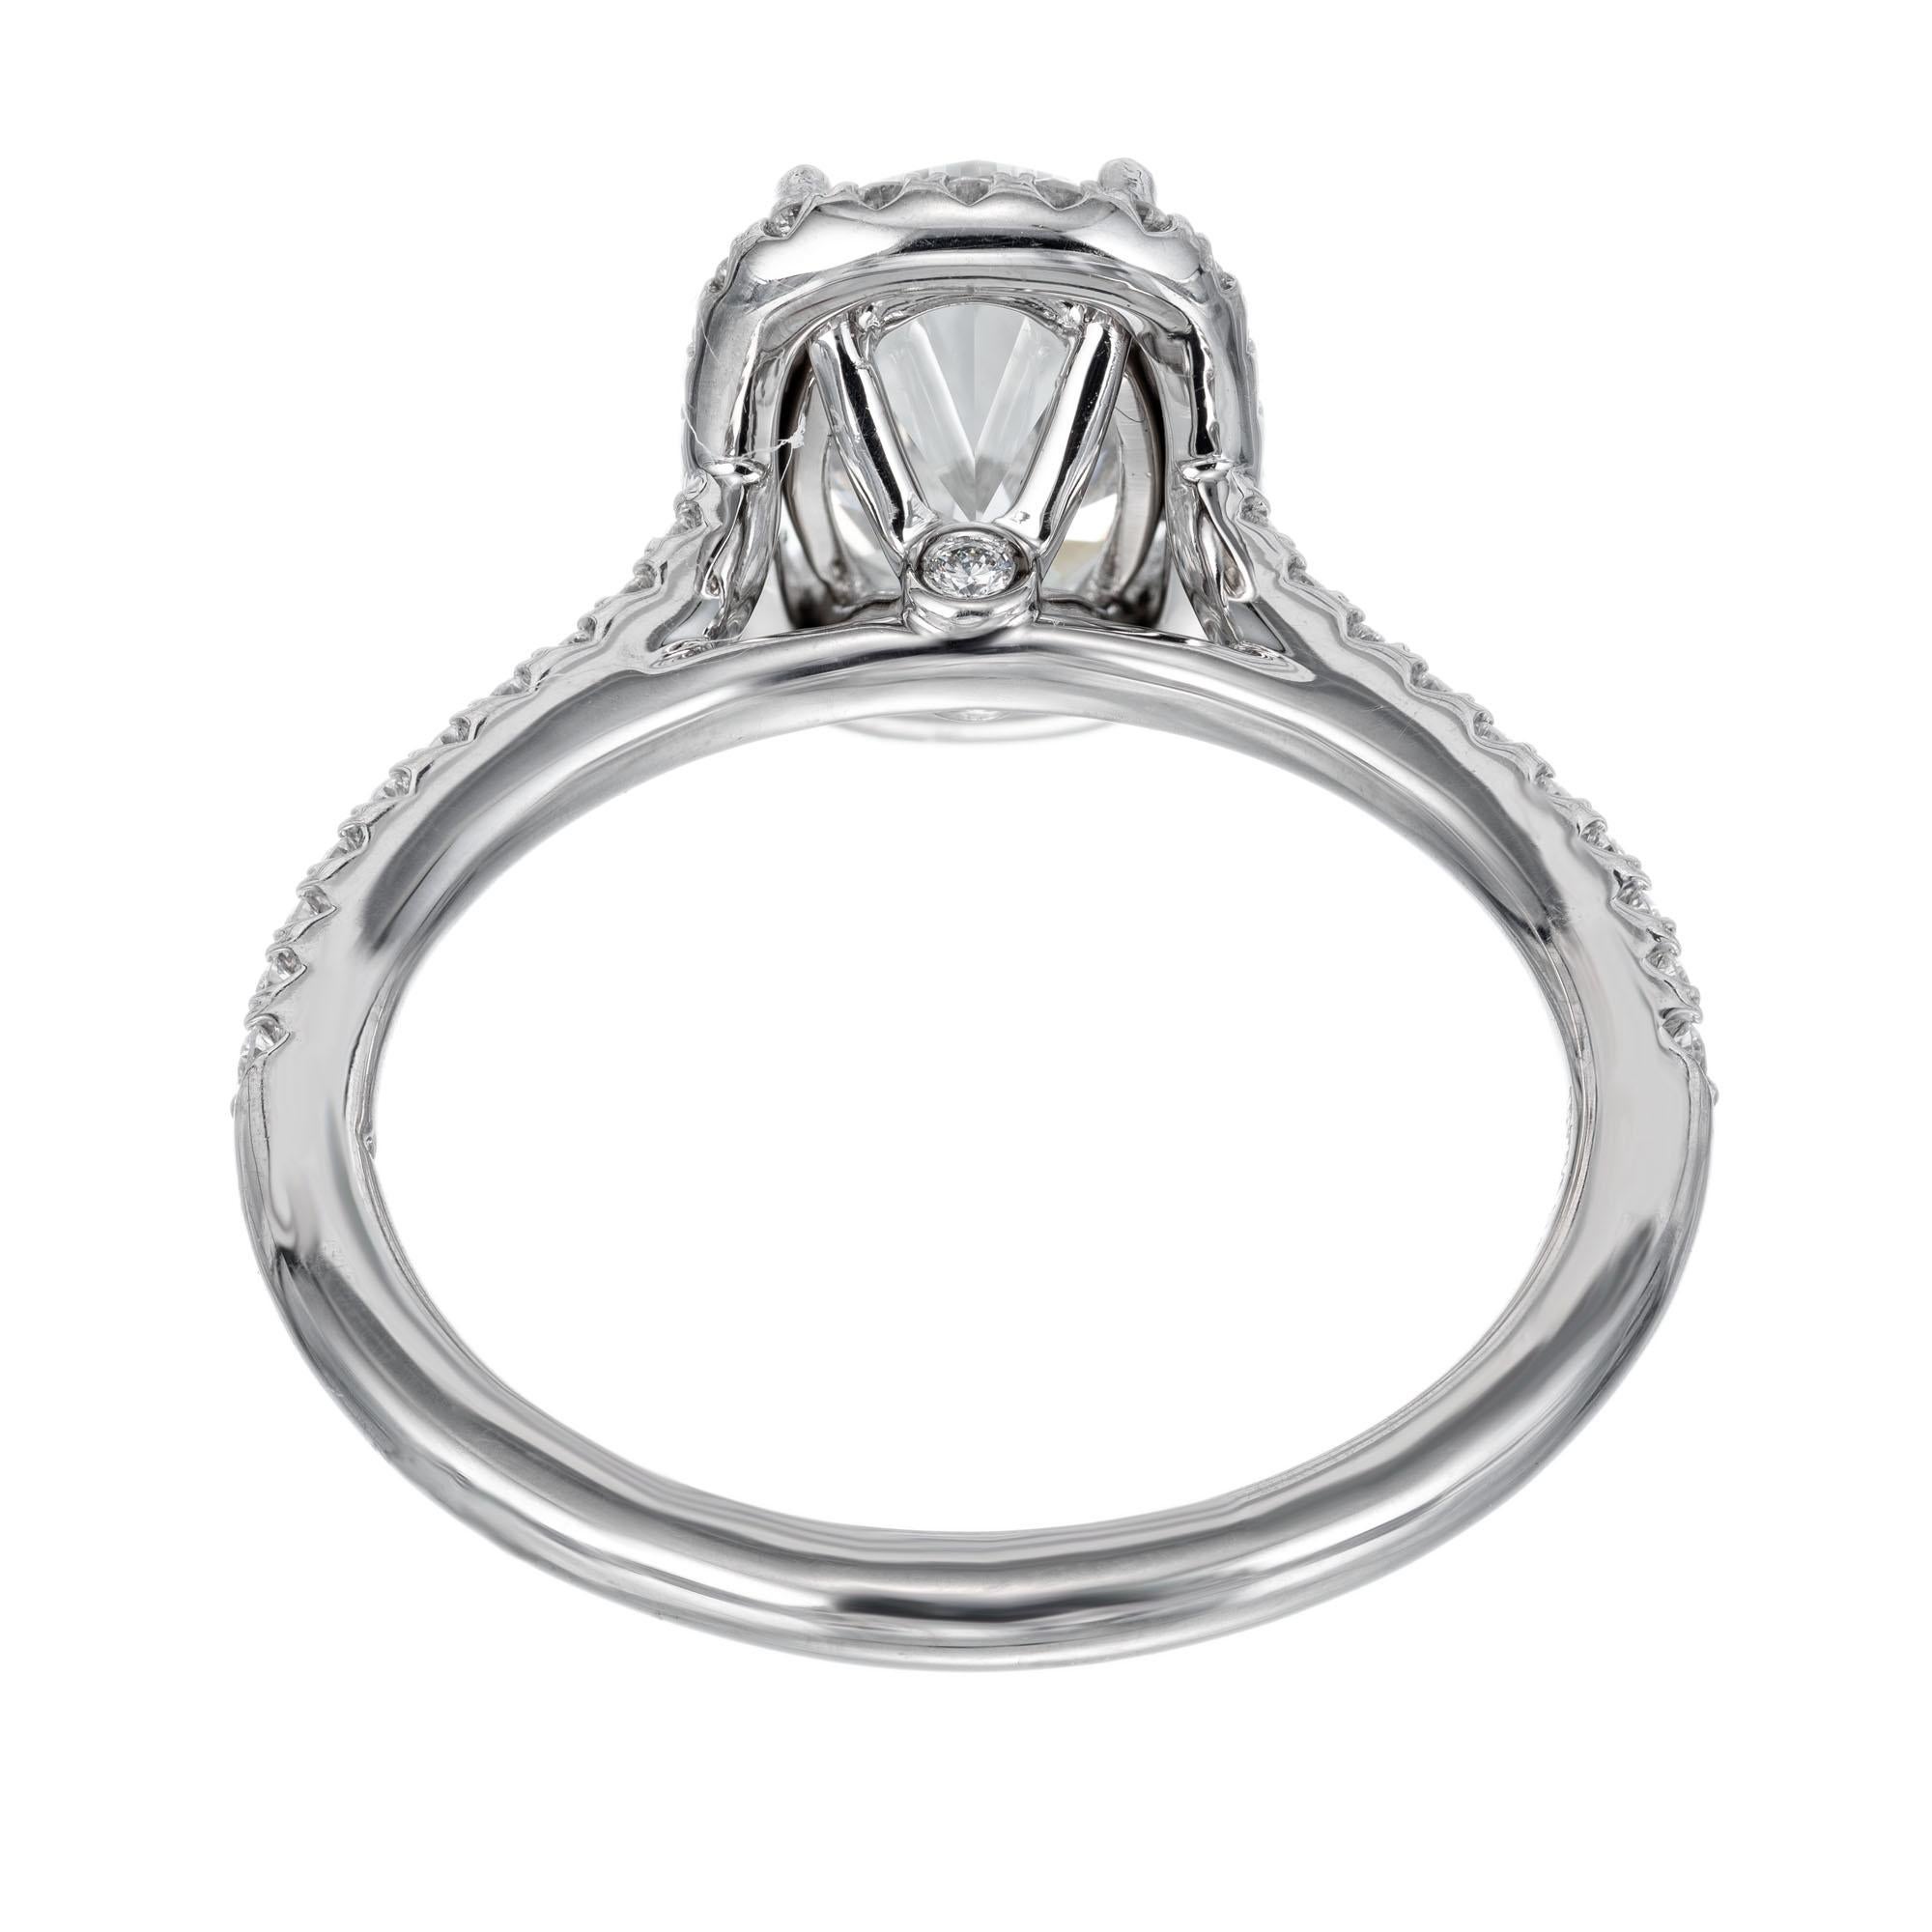 Peter Suchy GIA Certified 1.51 Carat Diamond Platinum Engagement Ring For Sale 2